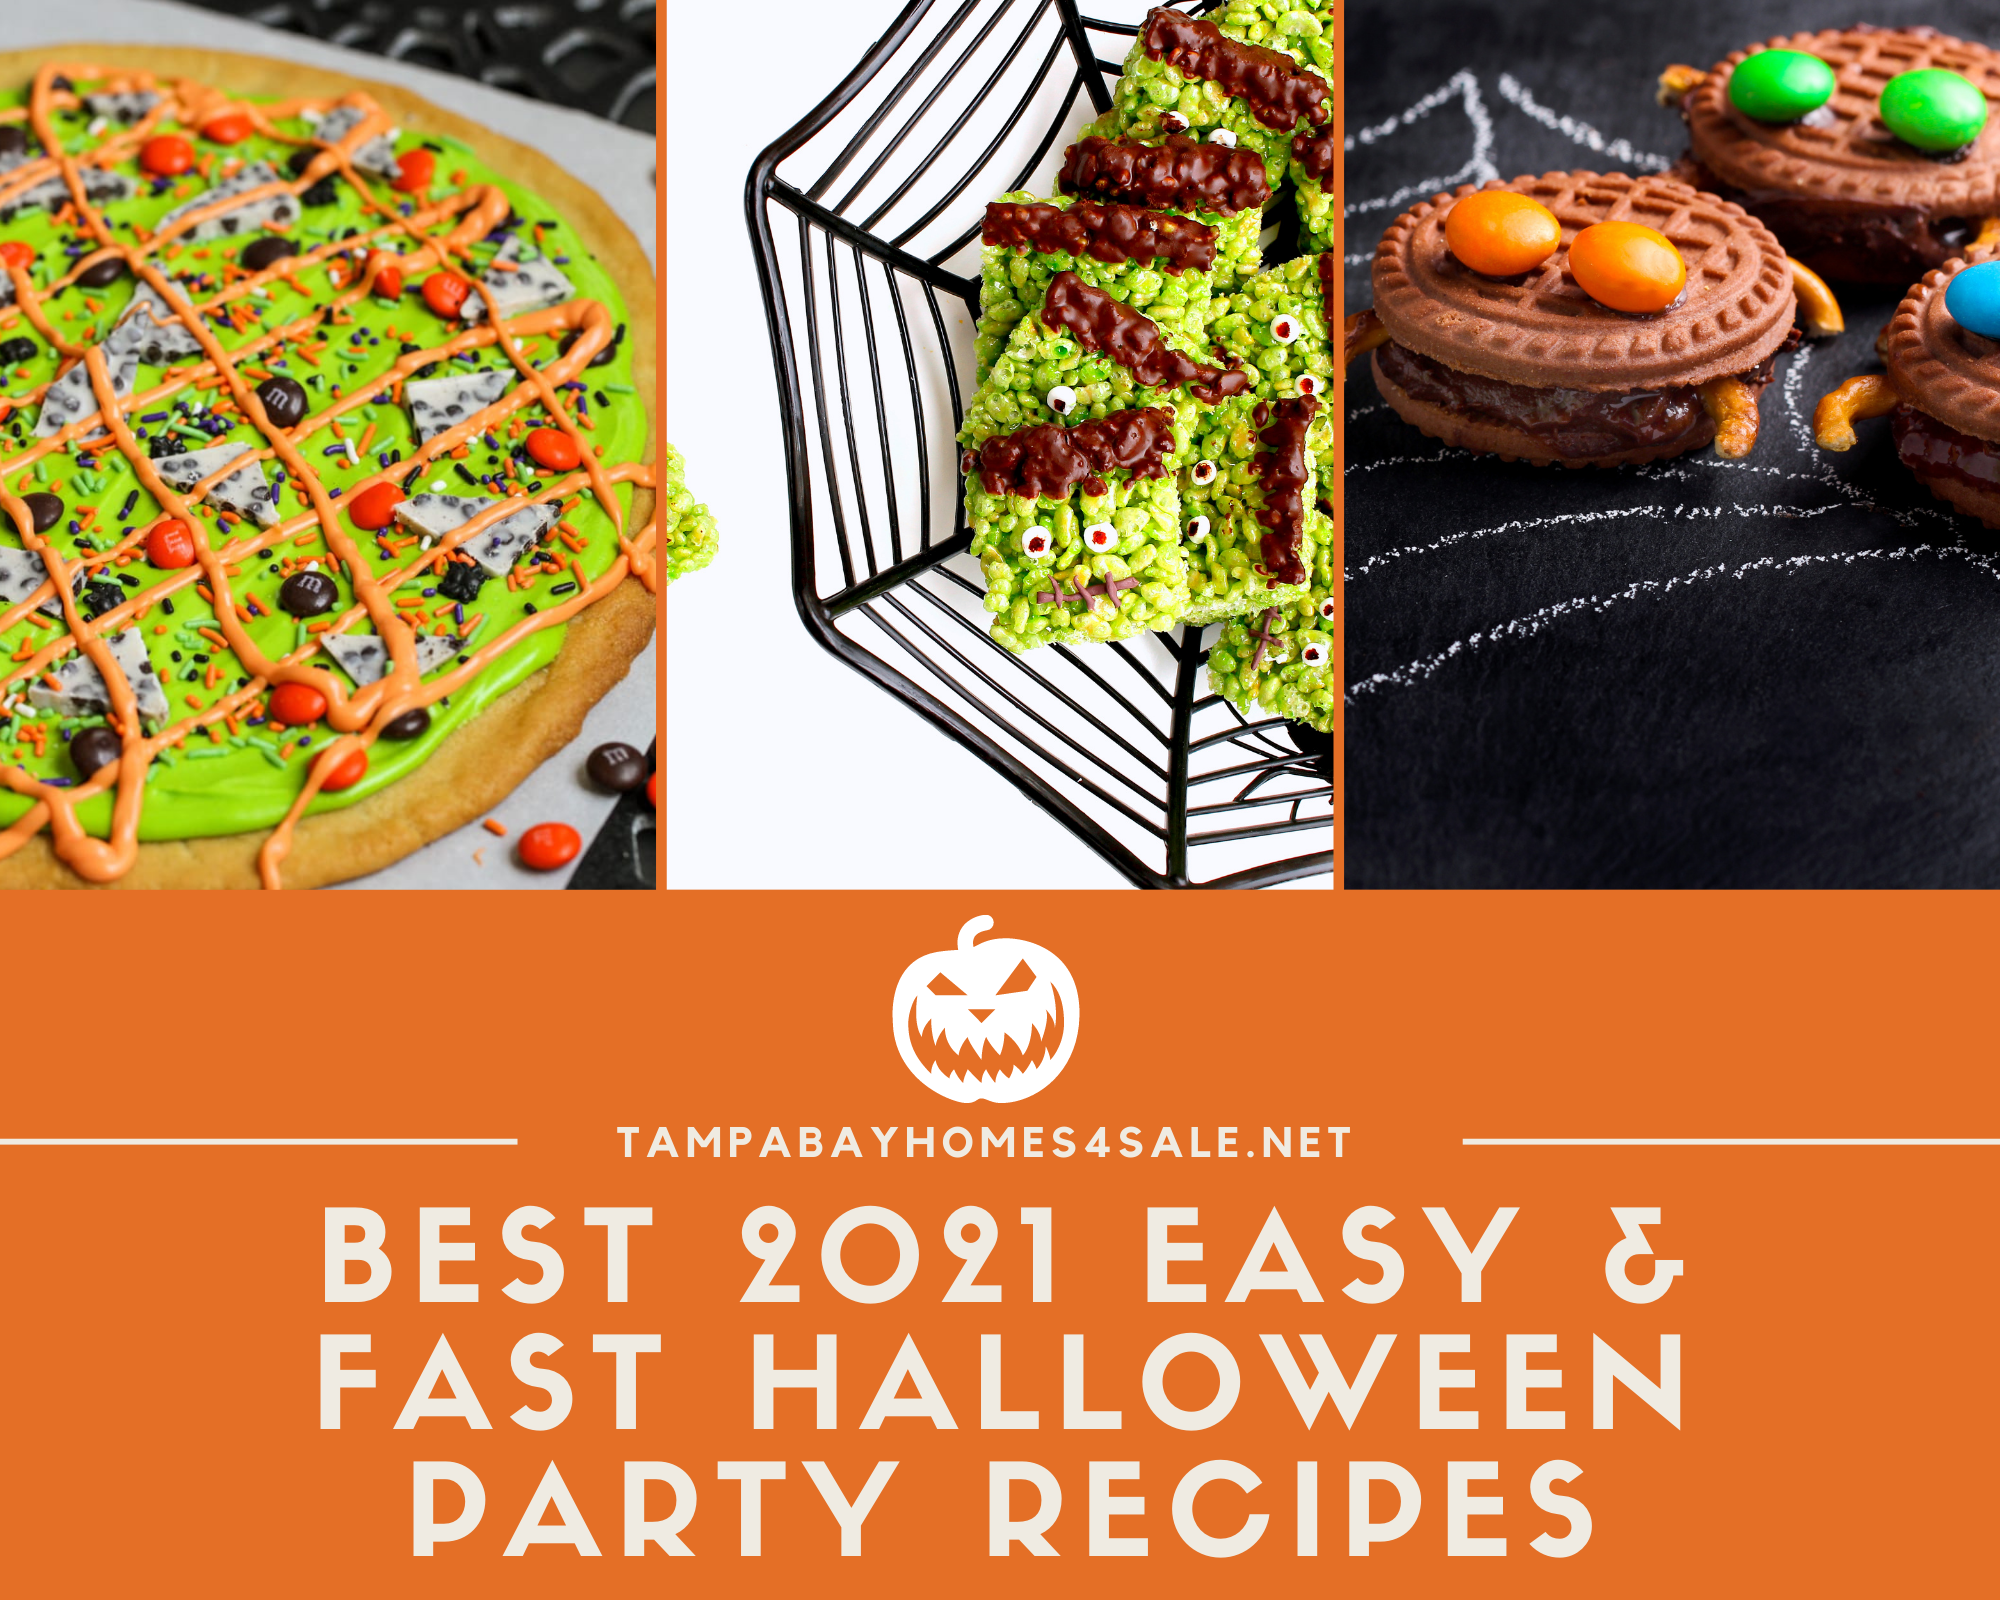 Best 2021 Easy & Fast Halloween Party Recipes to Make When You’re in a Pinch!